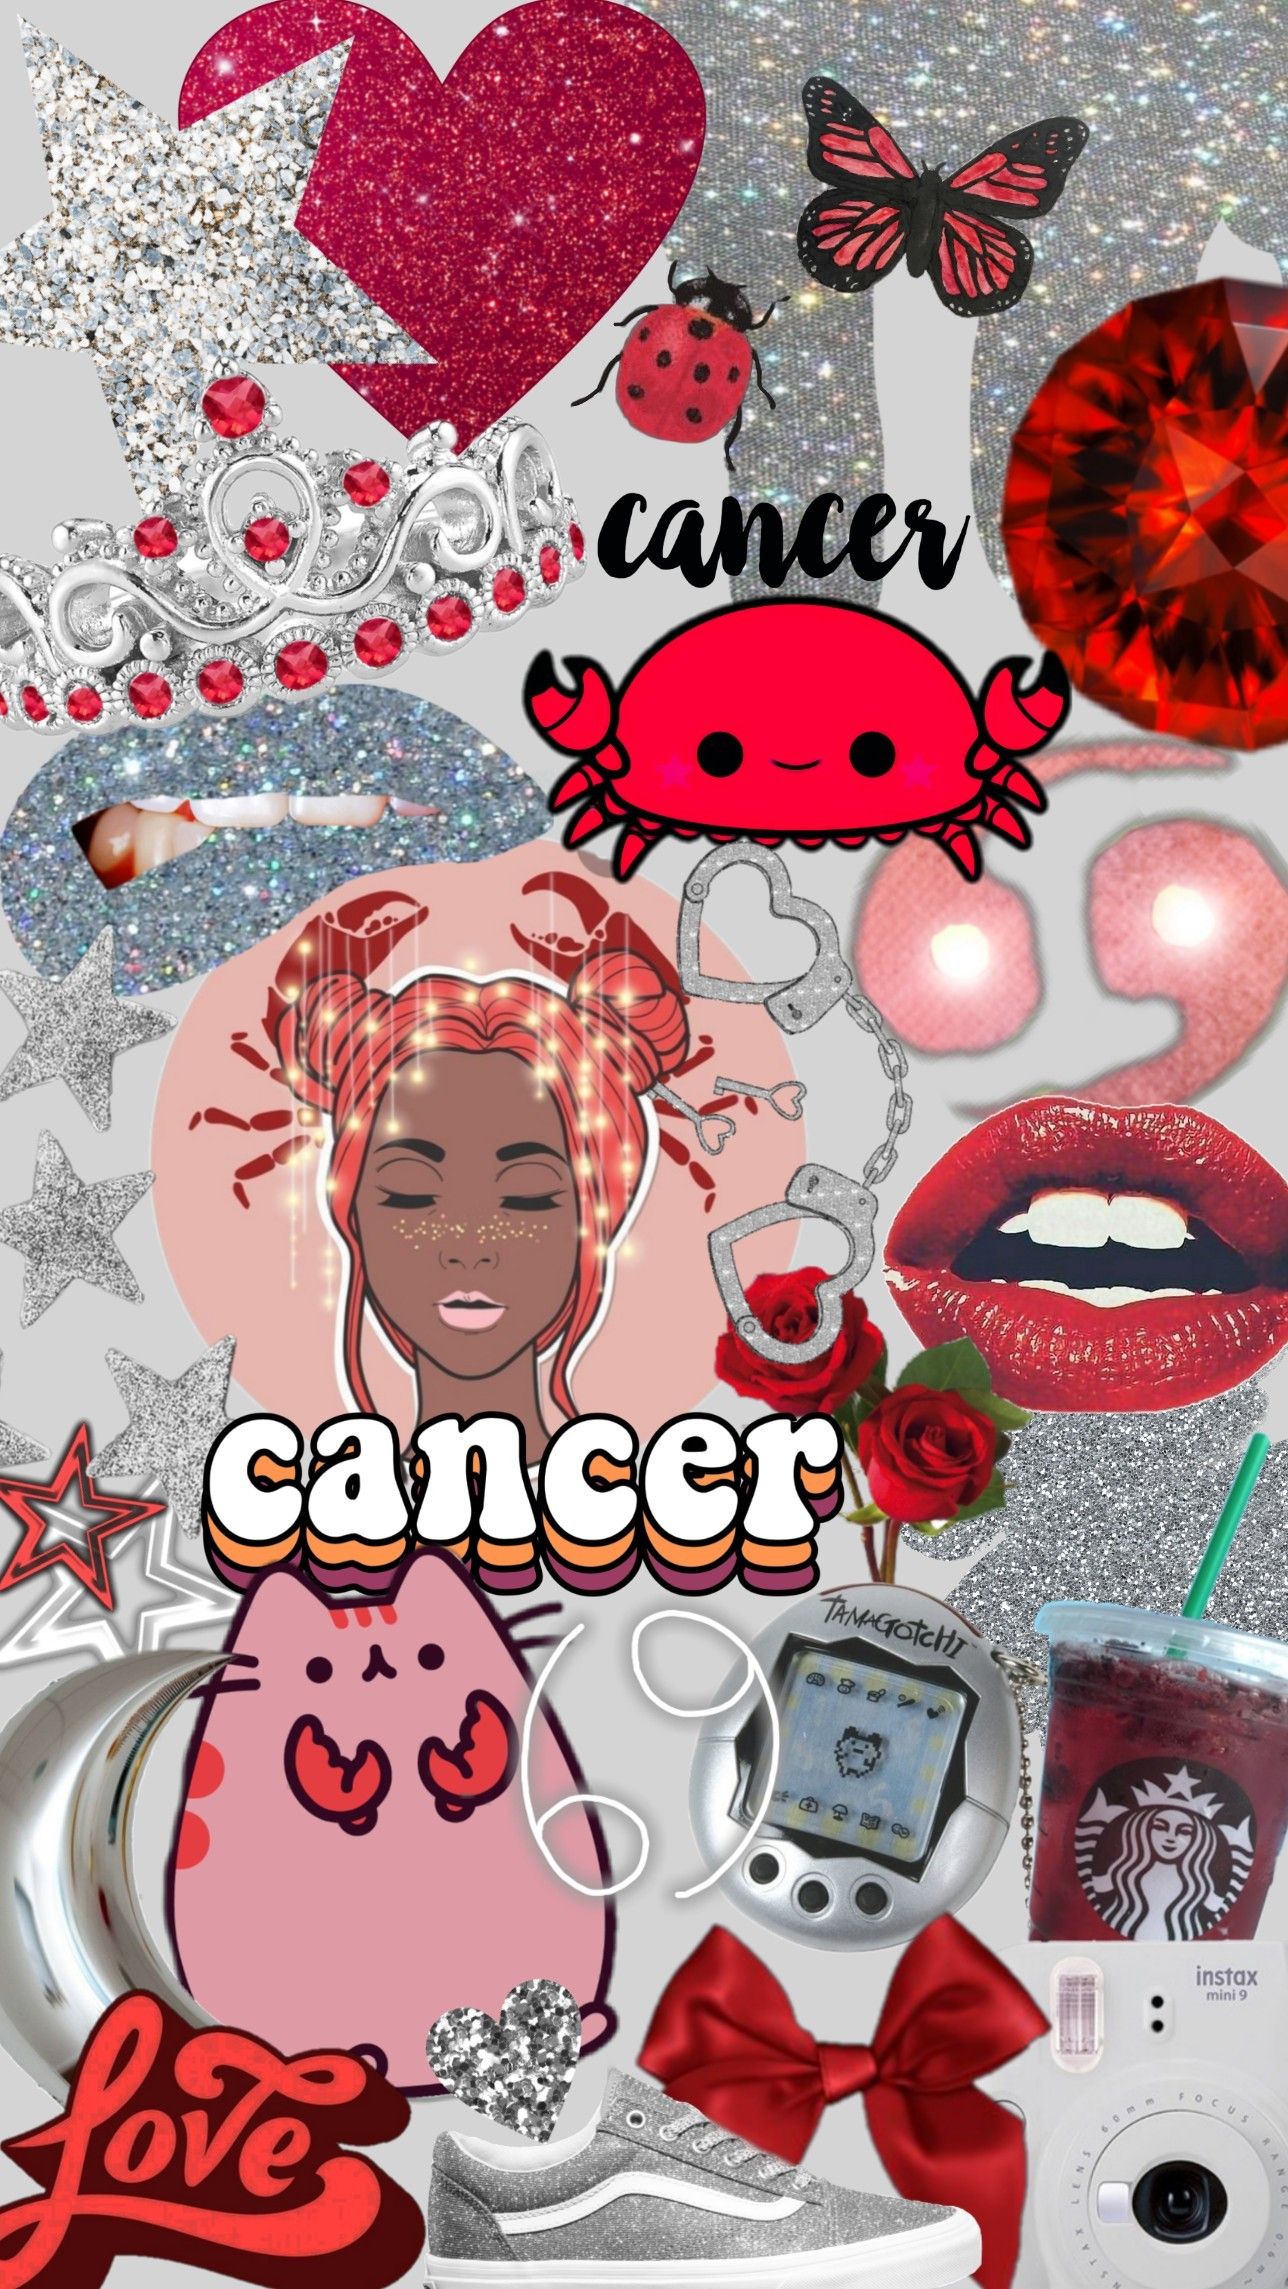 Cancer iPhone wallpaper background shared